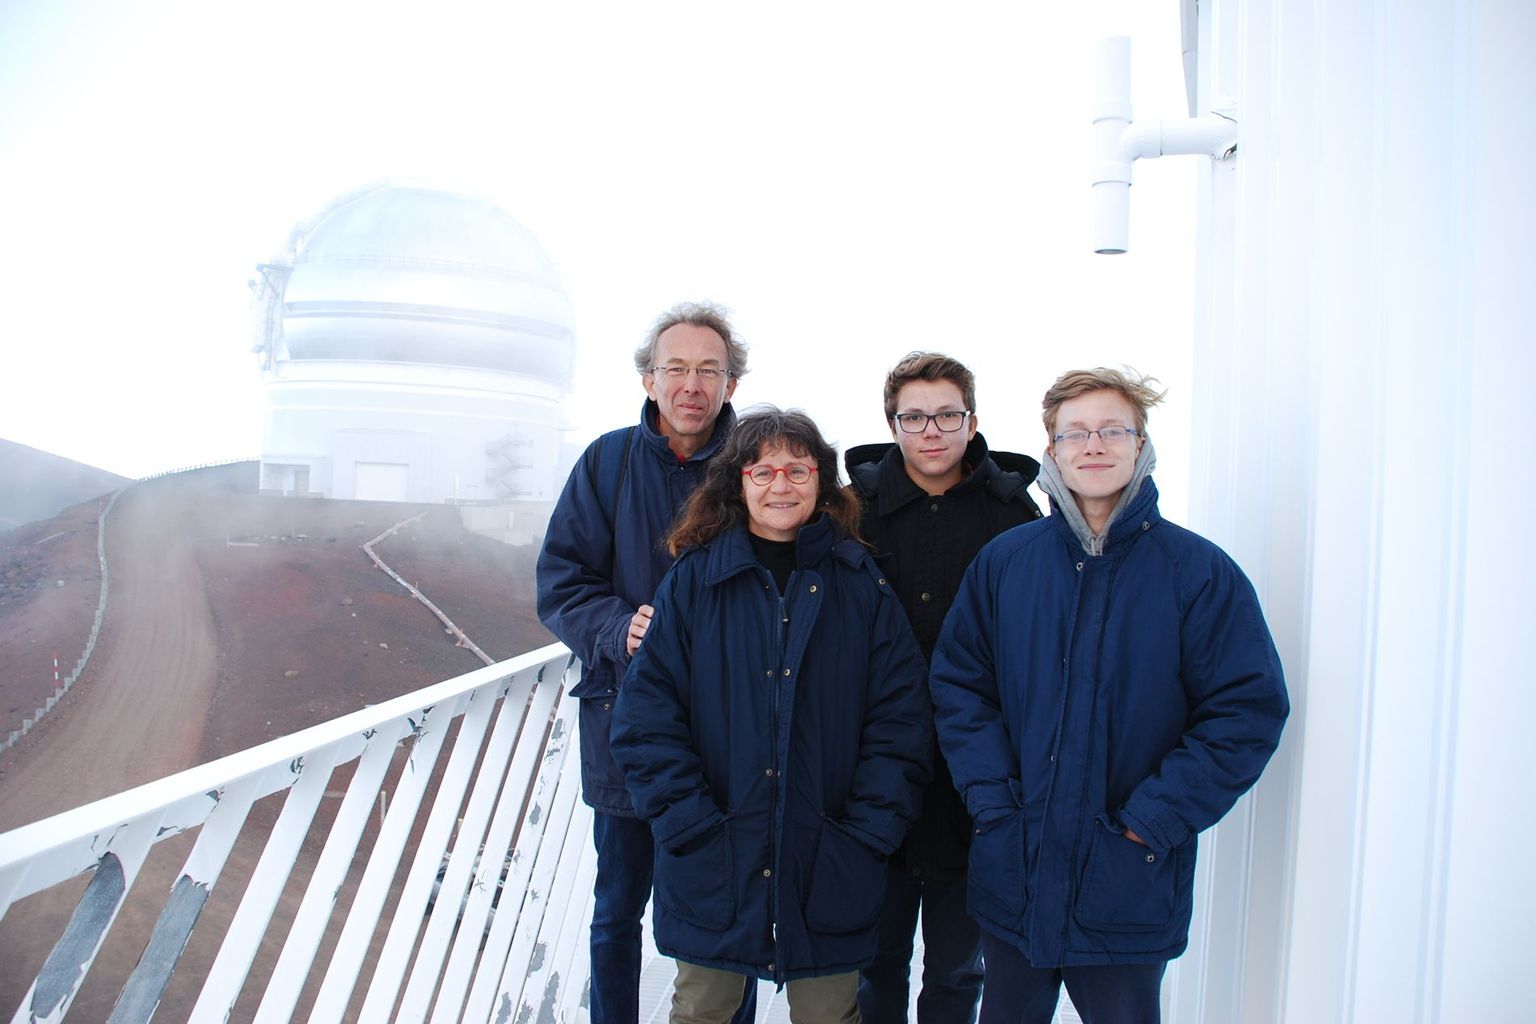 Corinne Charbonnel with her husband Daniel Schaerer and their two sons in front of the Canada-France-Hawaii telescope on the summit of the extinct volcano Mauna Kaa in Hawaii. The Centre National de la recherche scientifique (CRNS), a French research institution for which Corinne Charbonnel used to work, is a partner of the telescope. To balance her professional activities, the scientist pursues a number of hobbies, including reading, hiking, yoga and making music with her electric guitar.